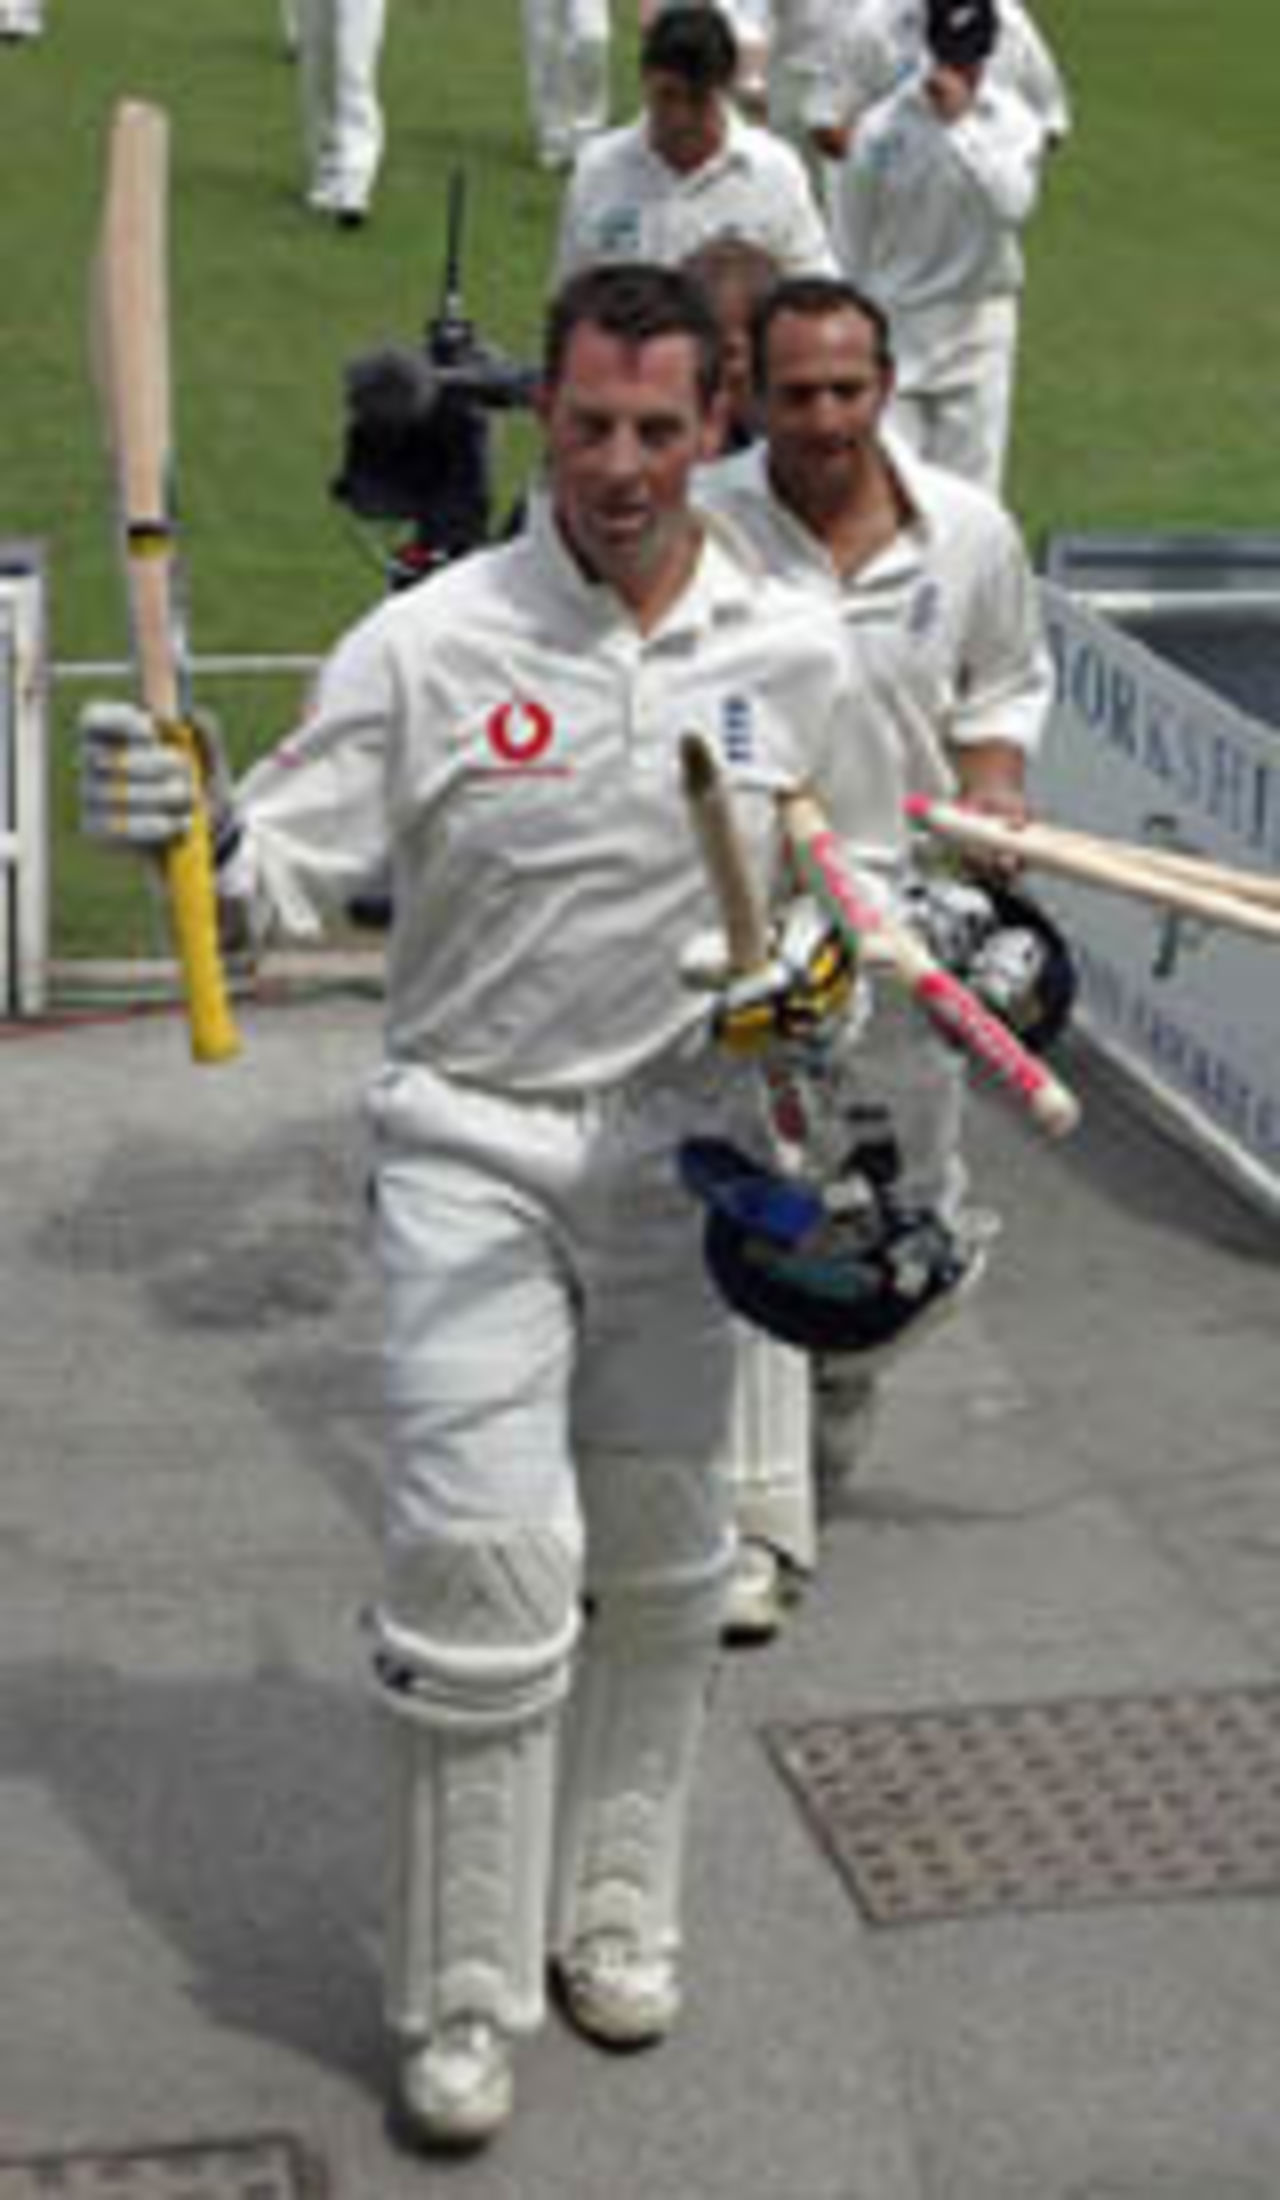 Marcus Trescothick leads England off after victory, England v New Zealand, 2nd Test, Headingley, June 7, 2004